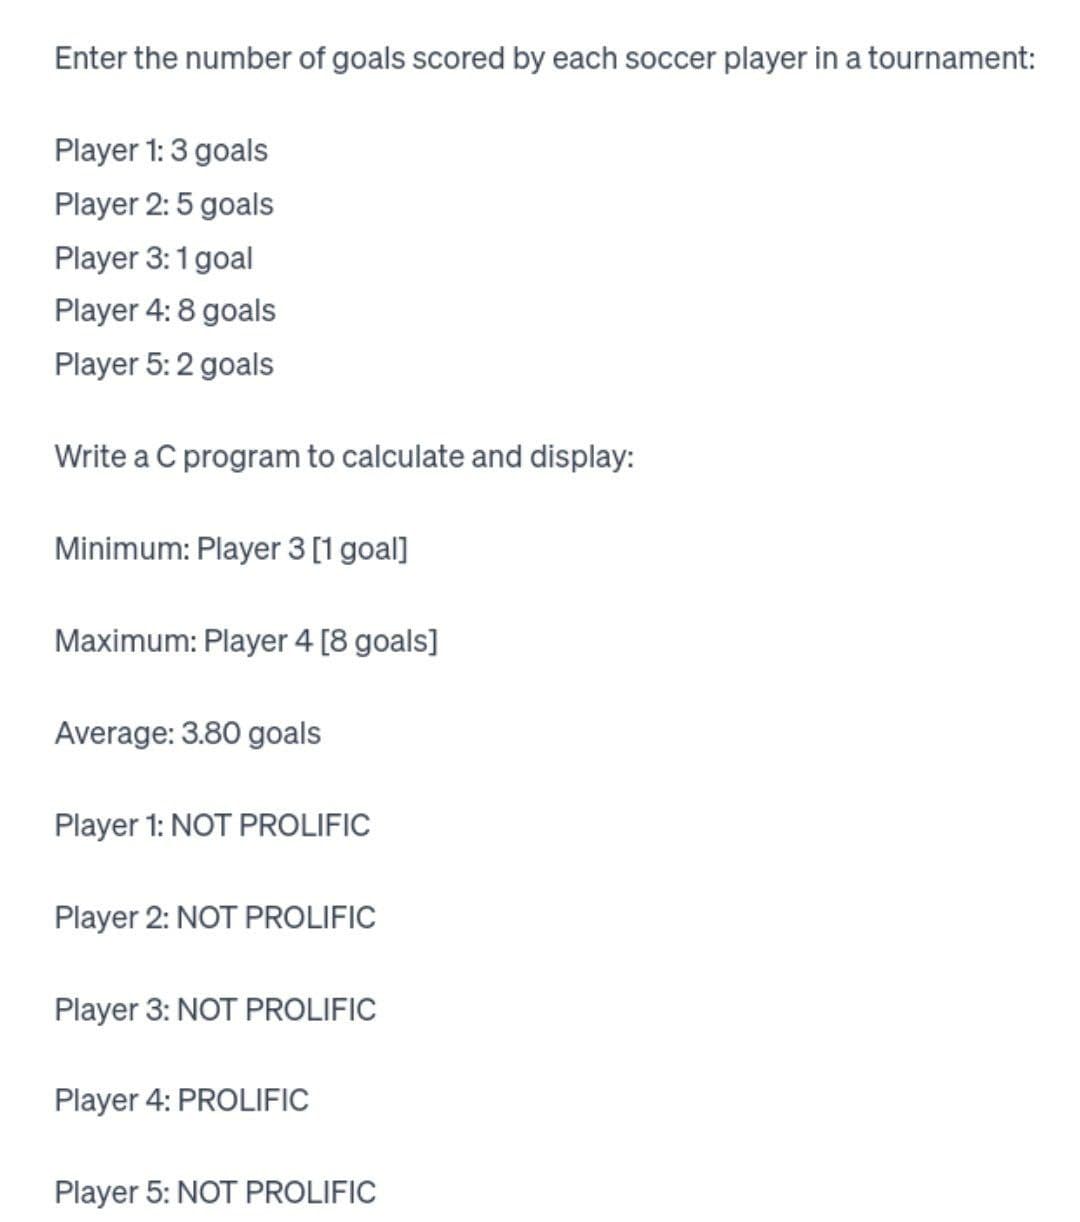 Enter the number of goals scored by each soccer player in a tournament:
Player 1: 3 goals
Player 2: 5 goals
Player 3:1 goal
Player 4: 8 goals
Player 5: 2 goals
Write a C program to calculate and display:
Minimum: Player 3 [1 goal]
Maximum: Player 4 [8 goals]
Average: 3.80 goals
Player 1: NOT PROLIFIC
Player 2: NOT PROLIFIC
Player 3: NOT PROLIFIC
Player 4: PROLIFIC
Player 5: NOT PROLIFIC